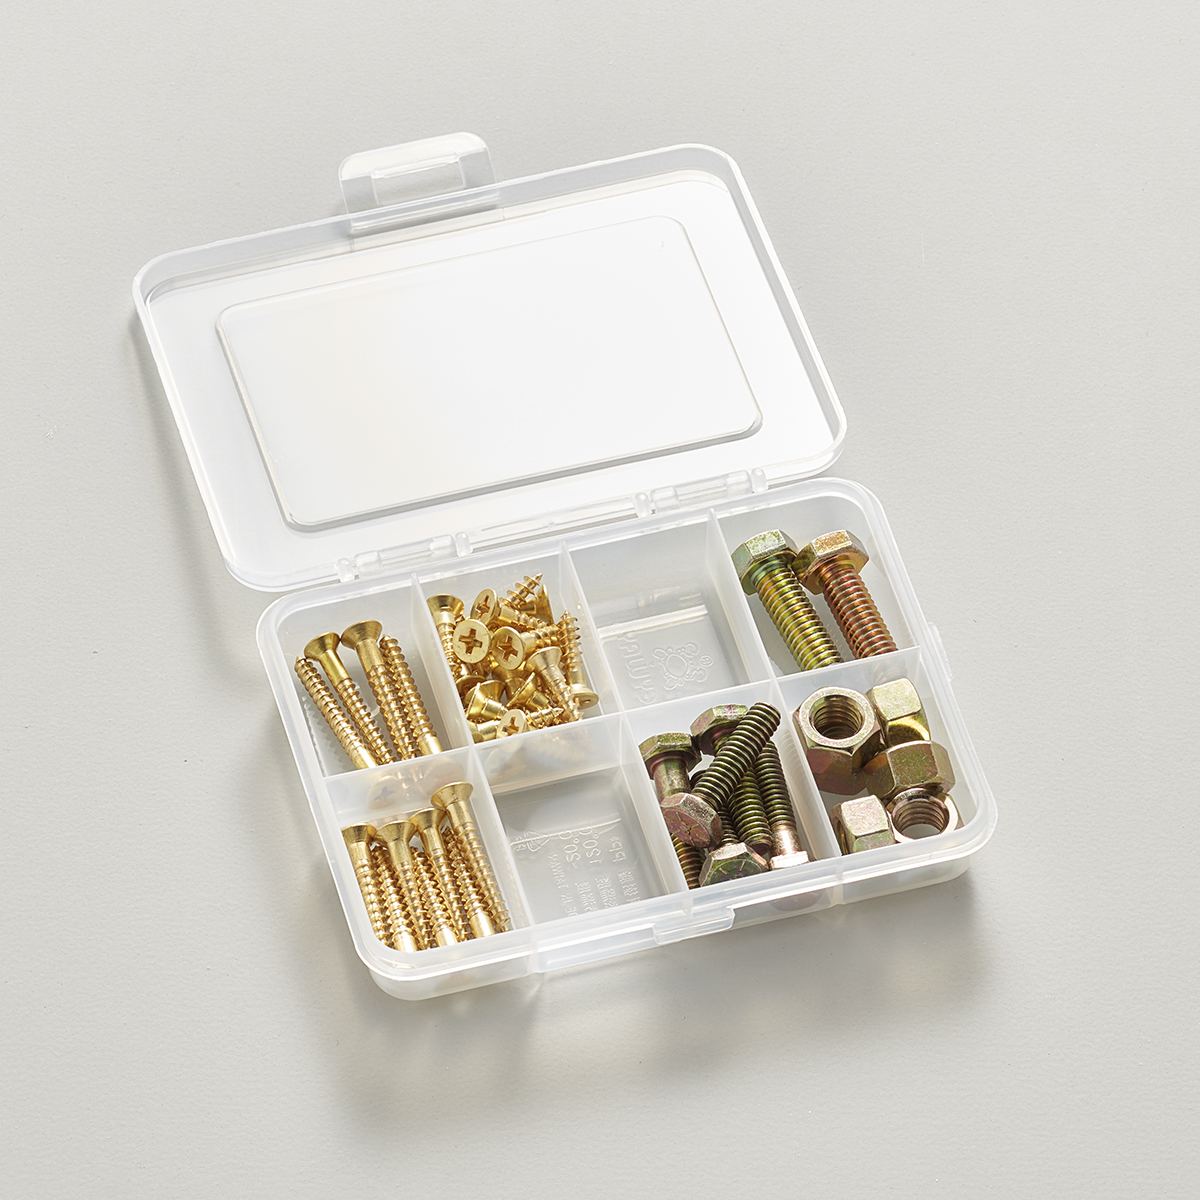 https://www.containerstore.com/catalogimages/466646/10051808-mini-8-compartment-box-tran.jpg